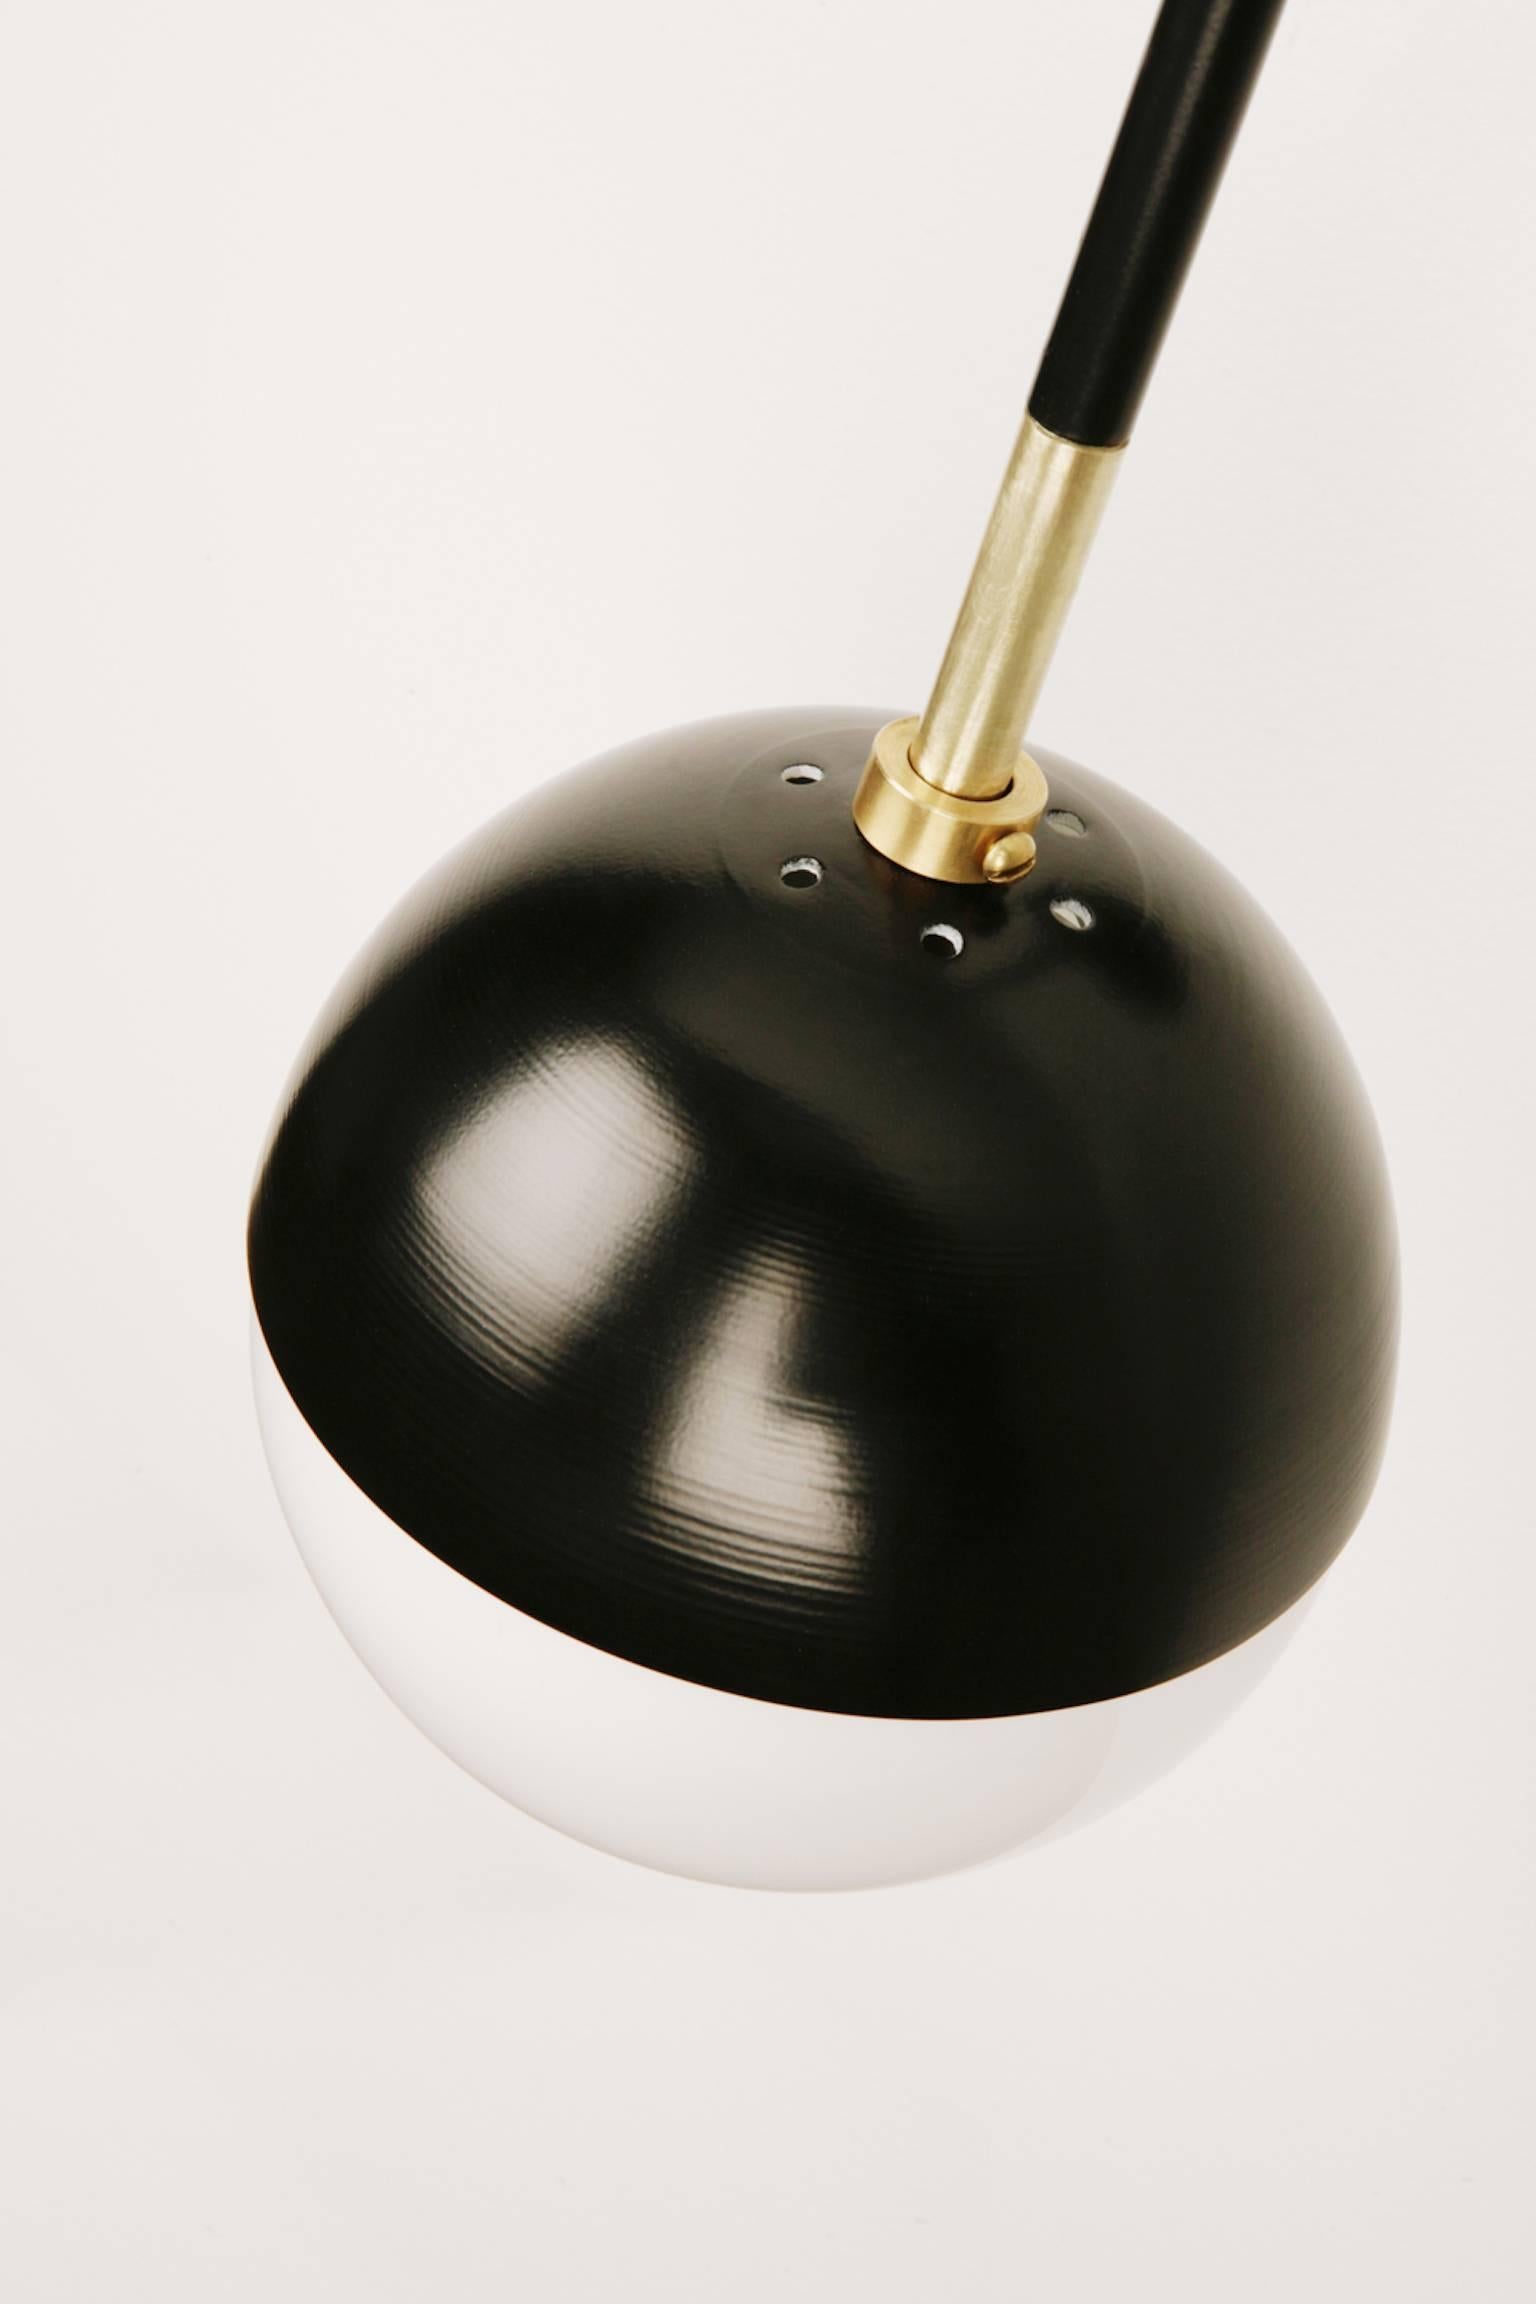 American Balise Sconce In Black Powder-Coated Steel With An Opal Glass Globe